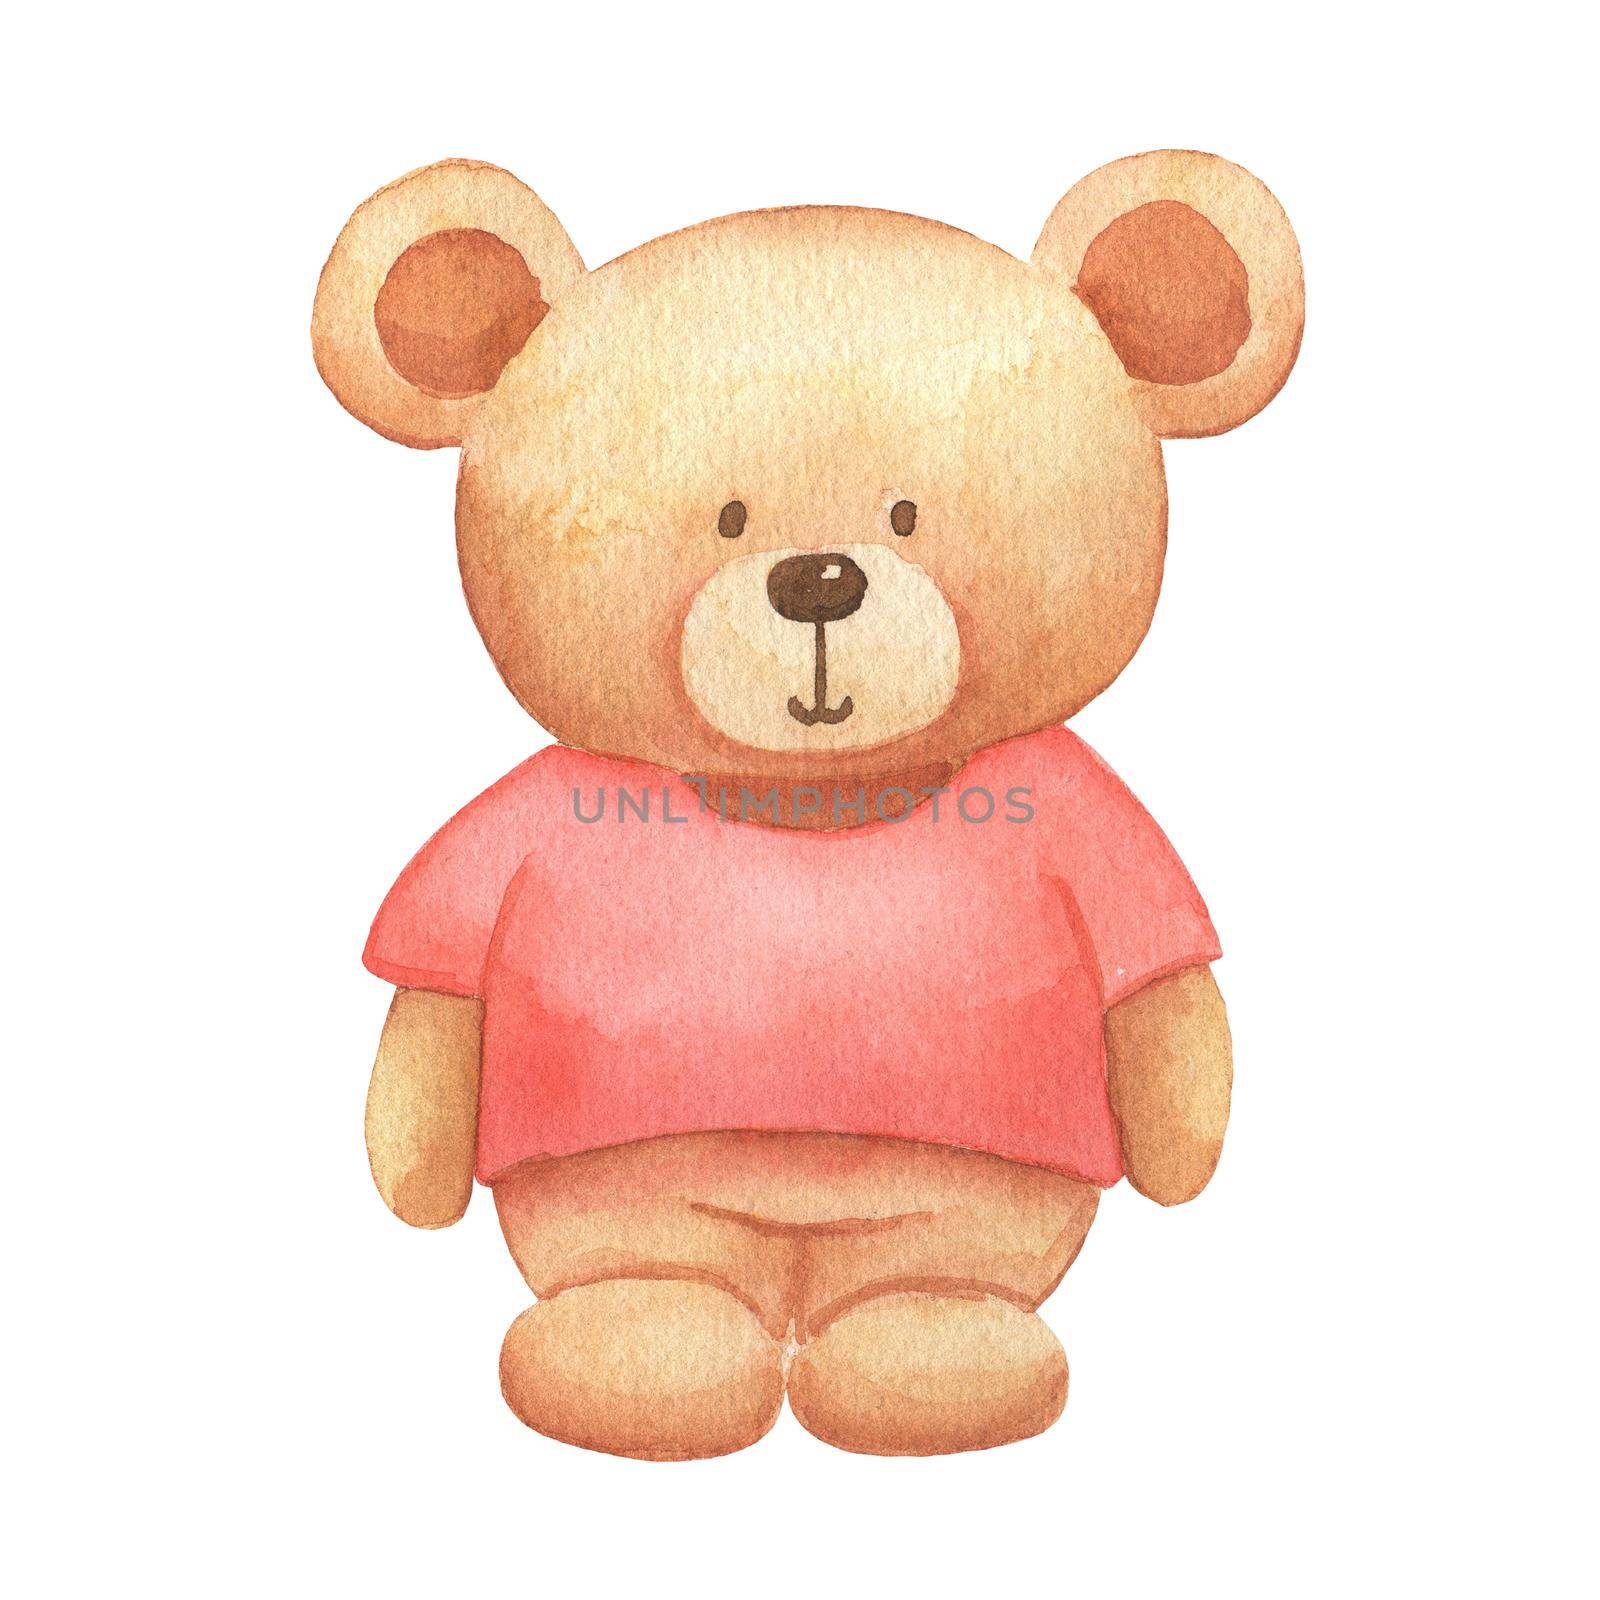 Watercolor cute bear toy in pink T-shirt. Hand drawn illustration isolated on white by ElenaPlatova